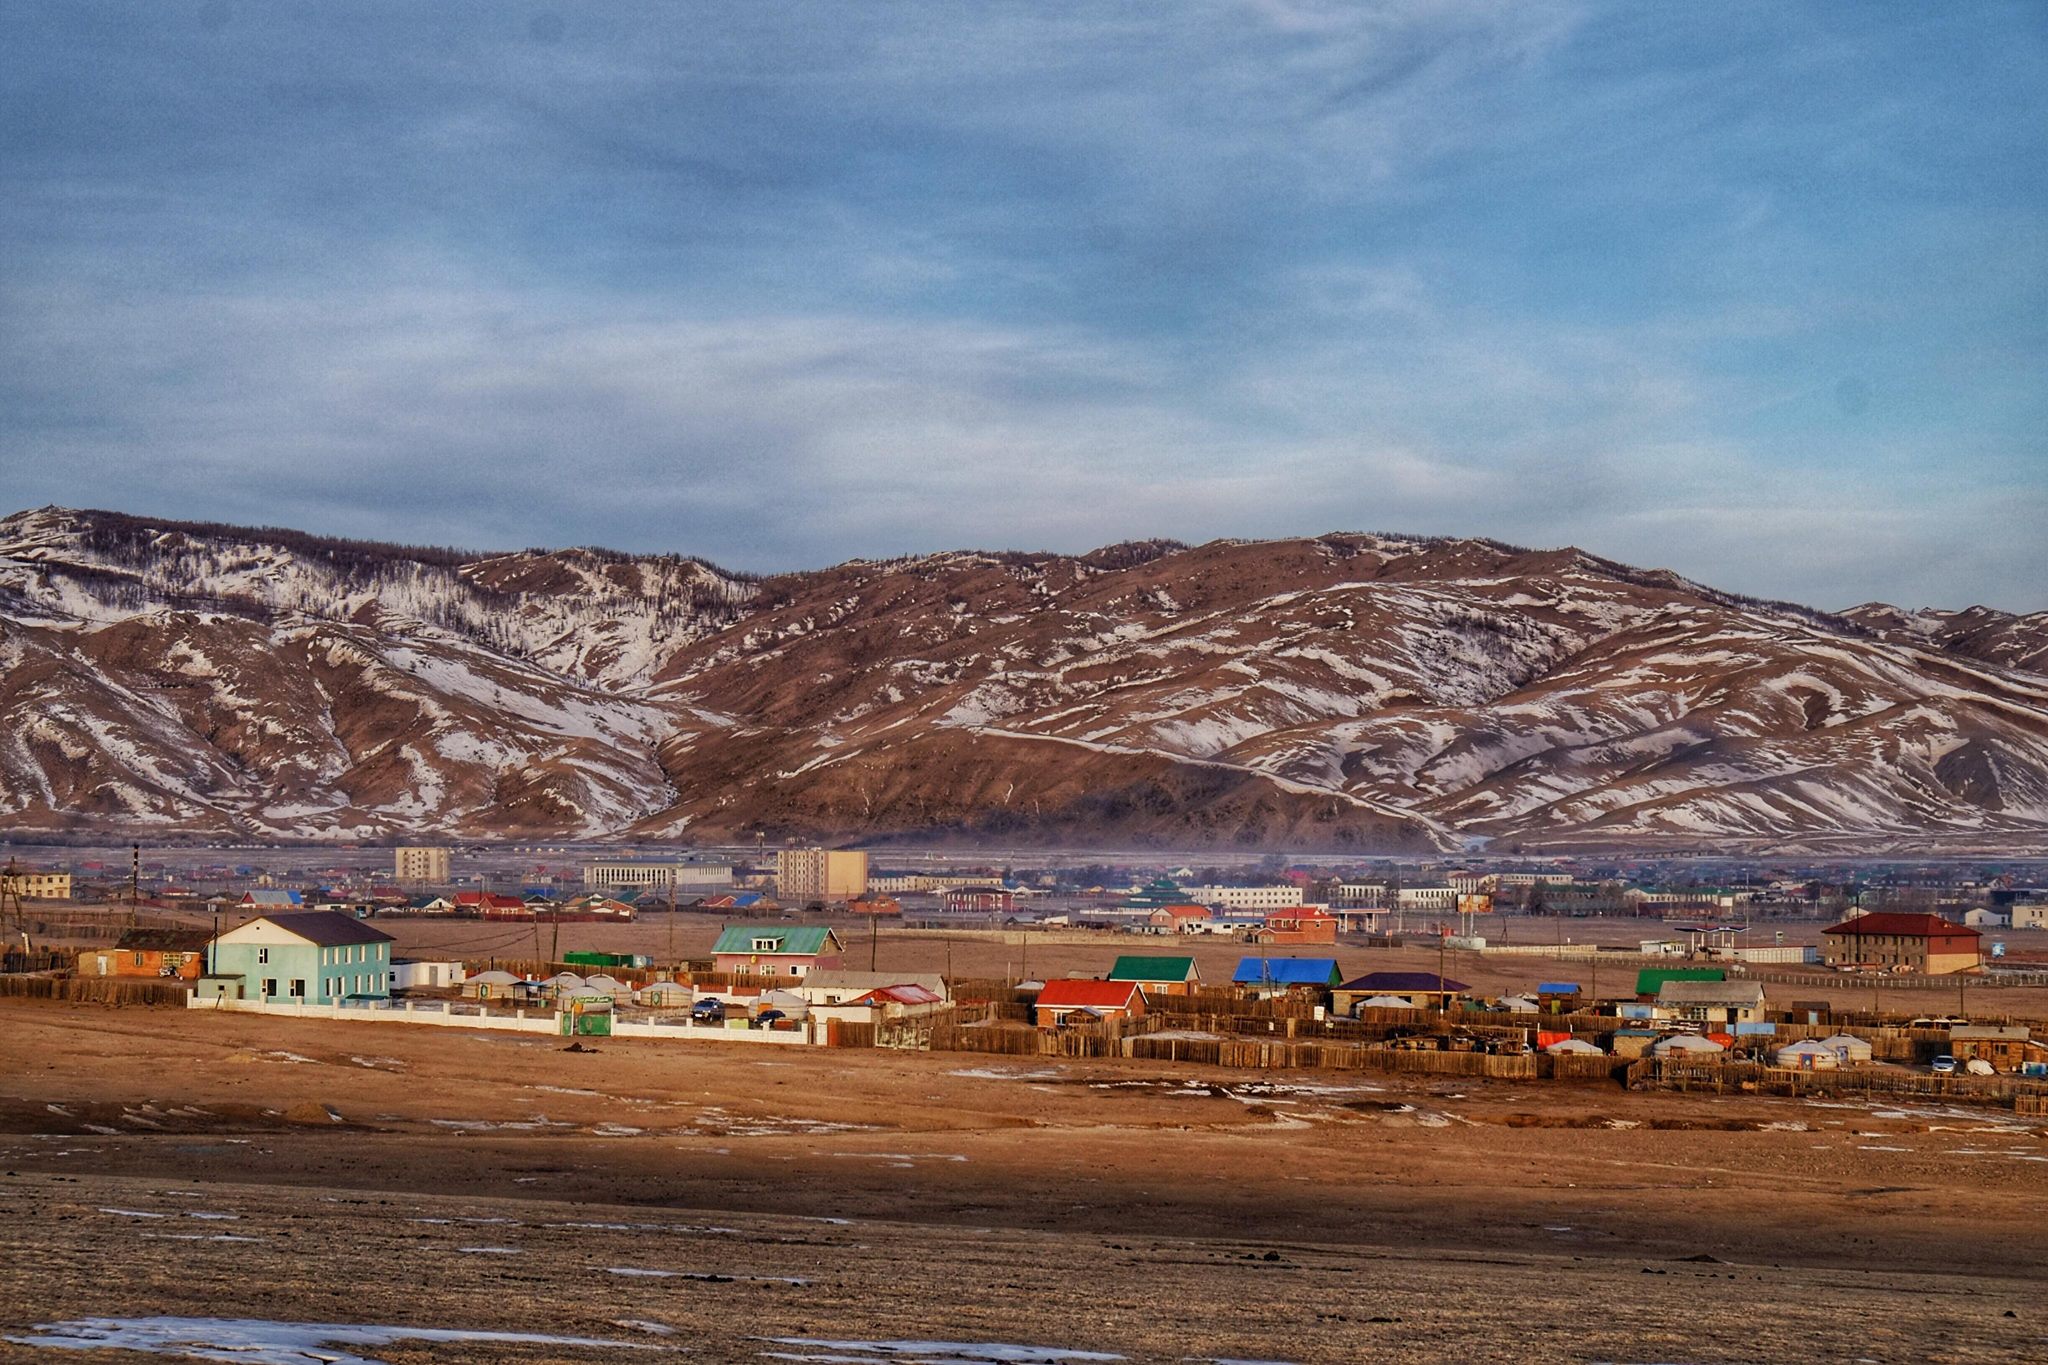 The town of Kharkhorin in central Mongolia with snow on the hilltops